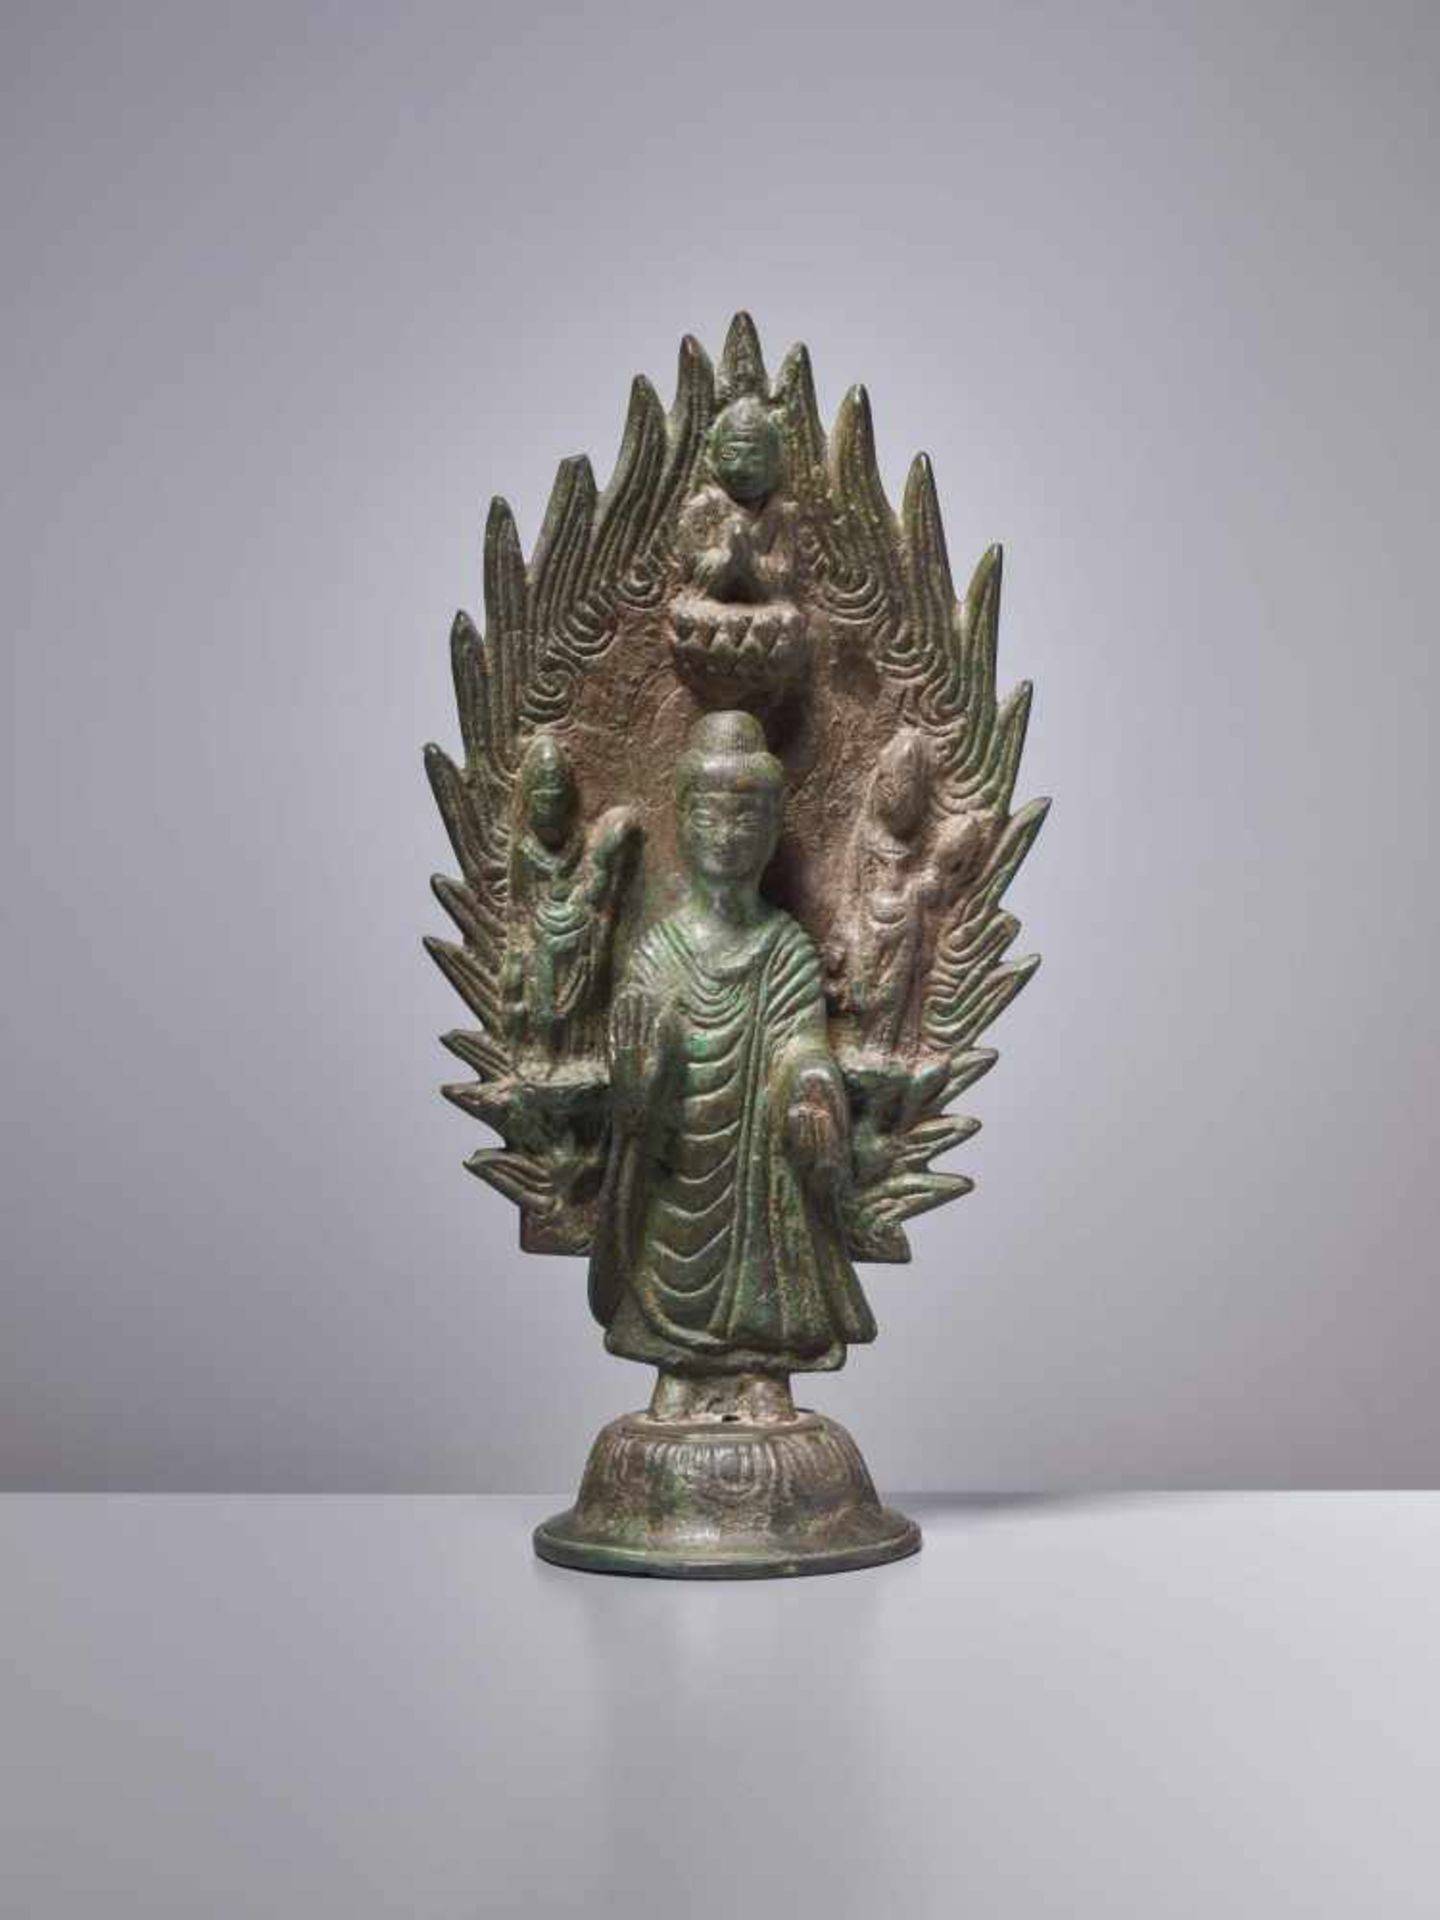 A BRONZE BUDDHA STANDING IN FRONT OF A FLAMING HALO, DATED 571 Cast and incised bronze with a rich - Image 2 of 7